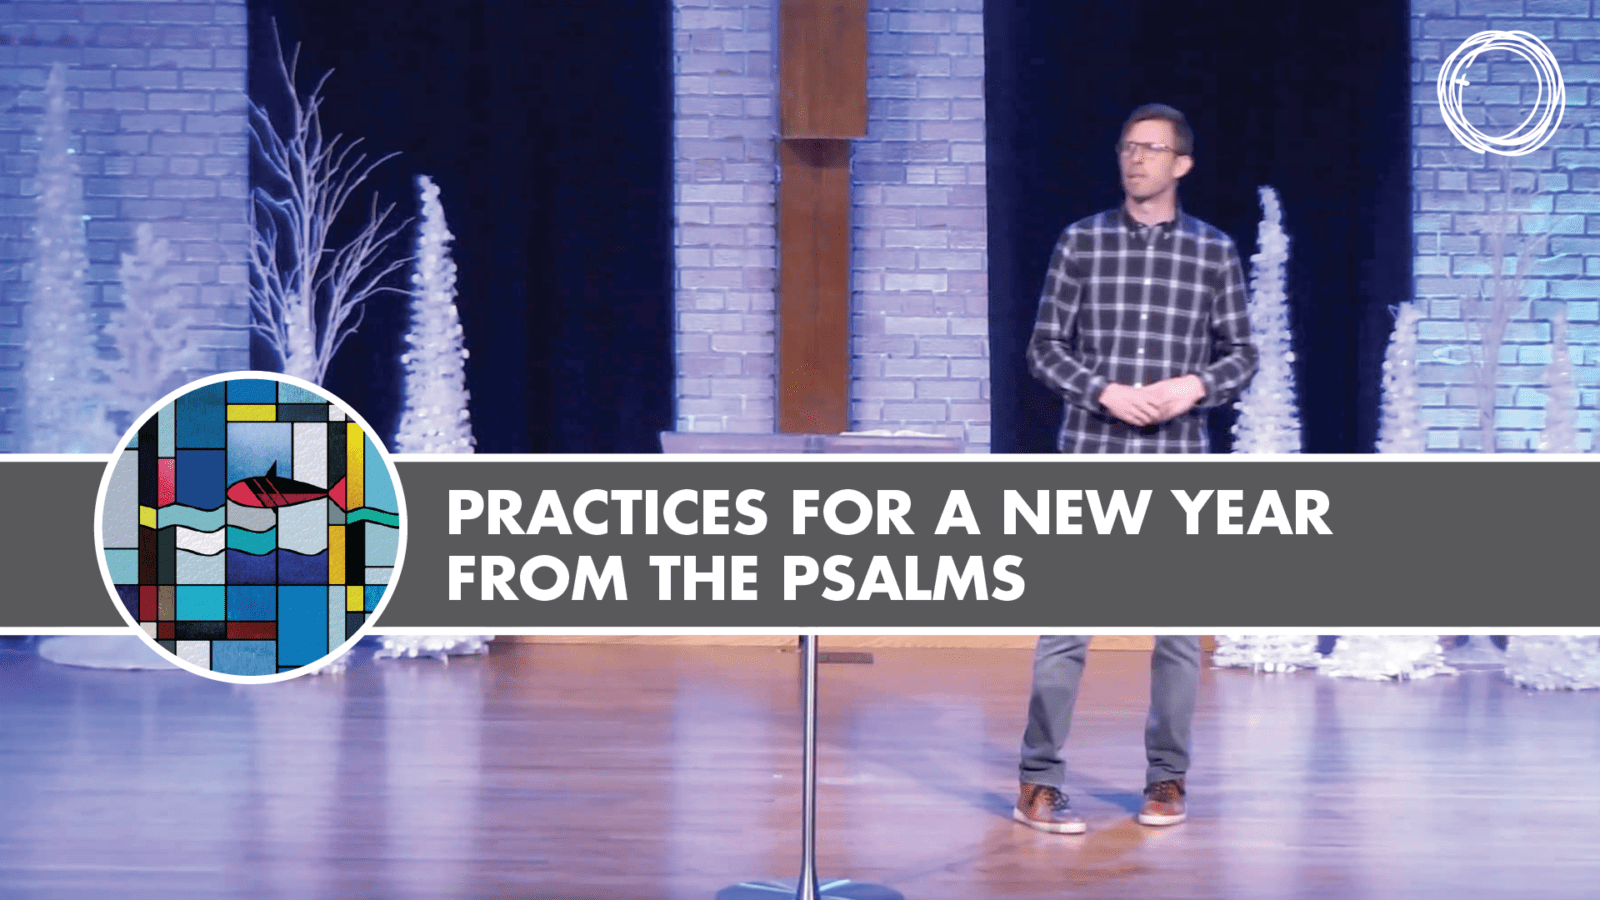 Practices for a New Year from the Psalms